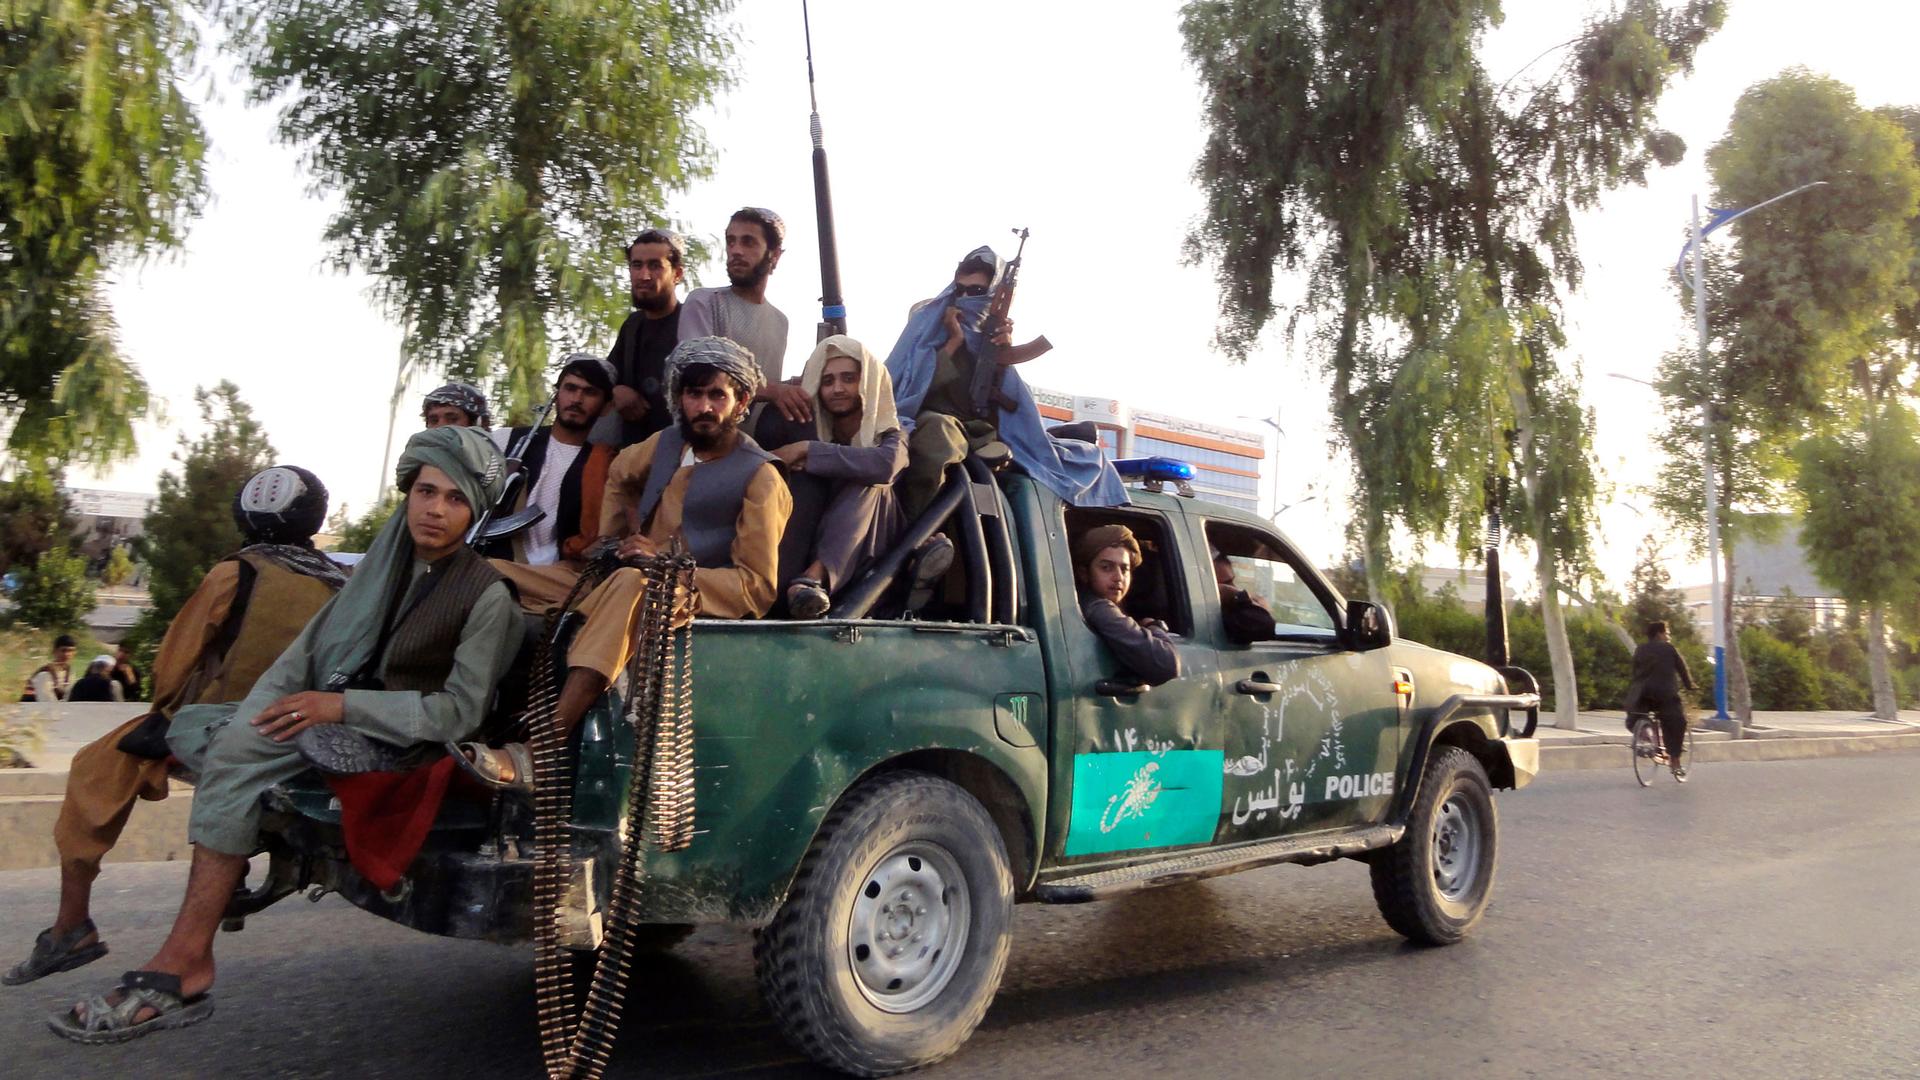 Several Taliban fighters are shown sitting in the back of a pickup truck, several holding weapons.